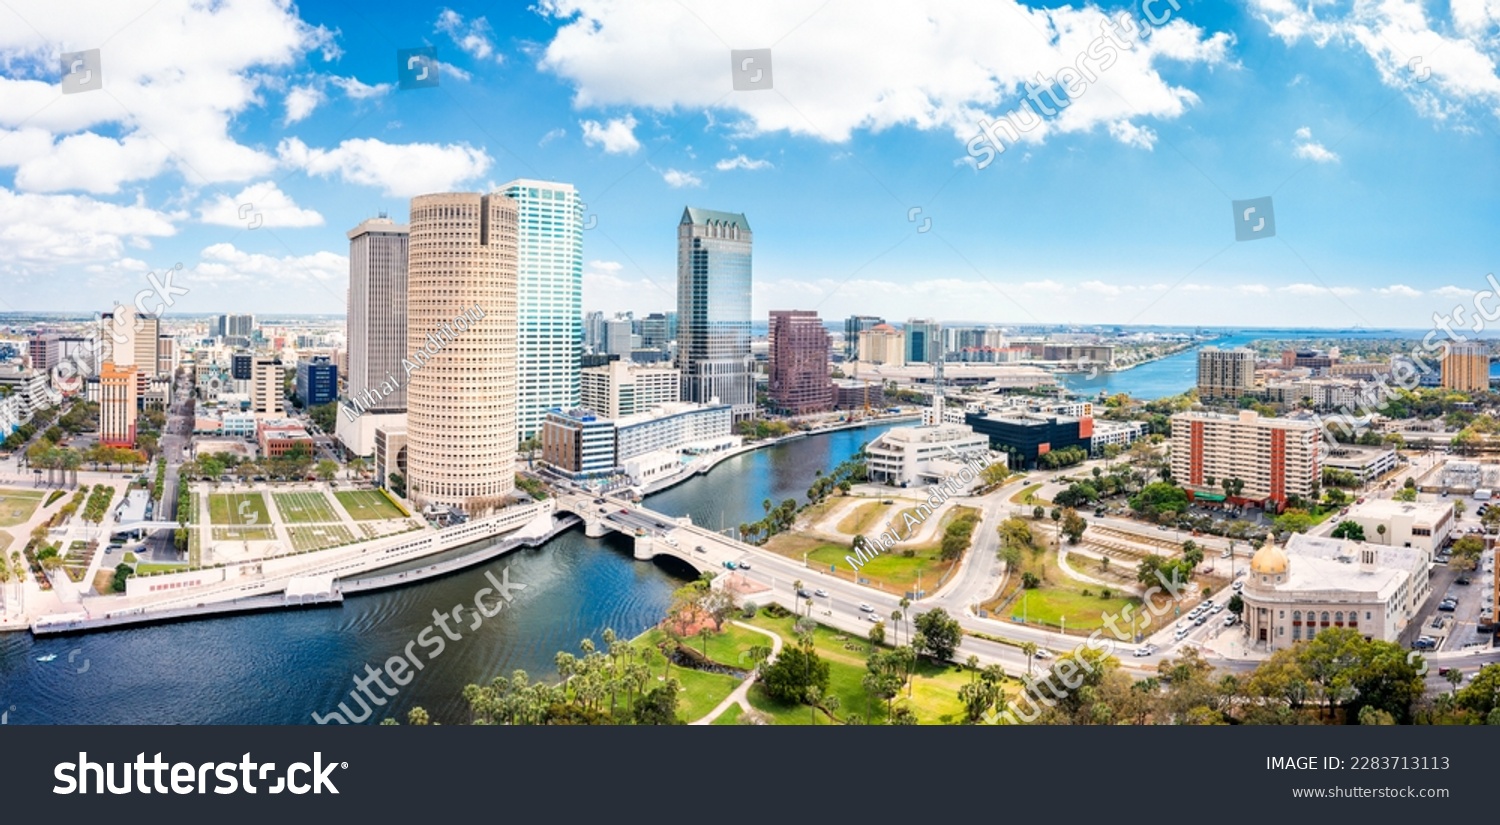 Aerial panorama of Tampa, Florida skyline. Tampa is a city on the Gulf Coast of the U.S. state of Florida. #2283713113